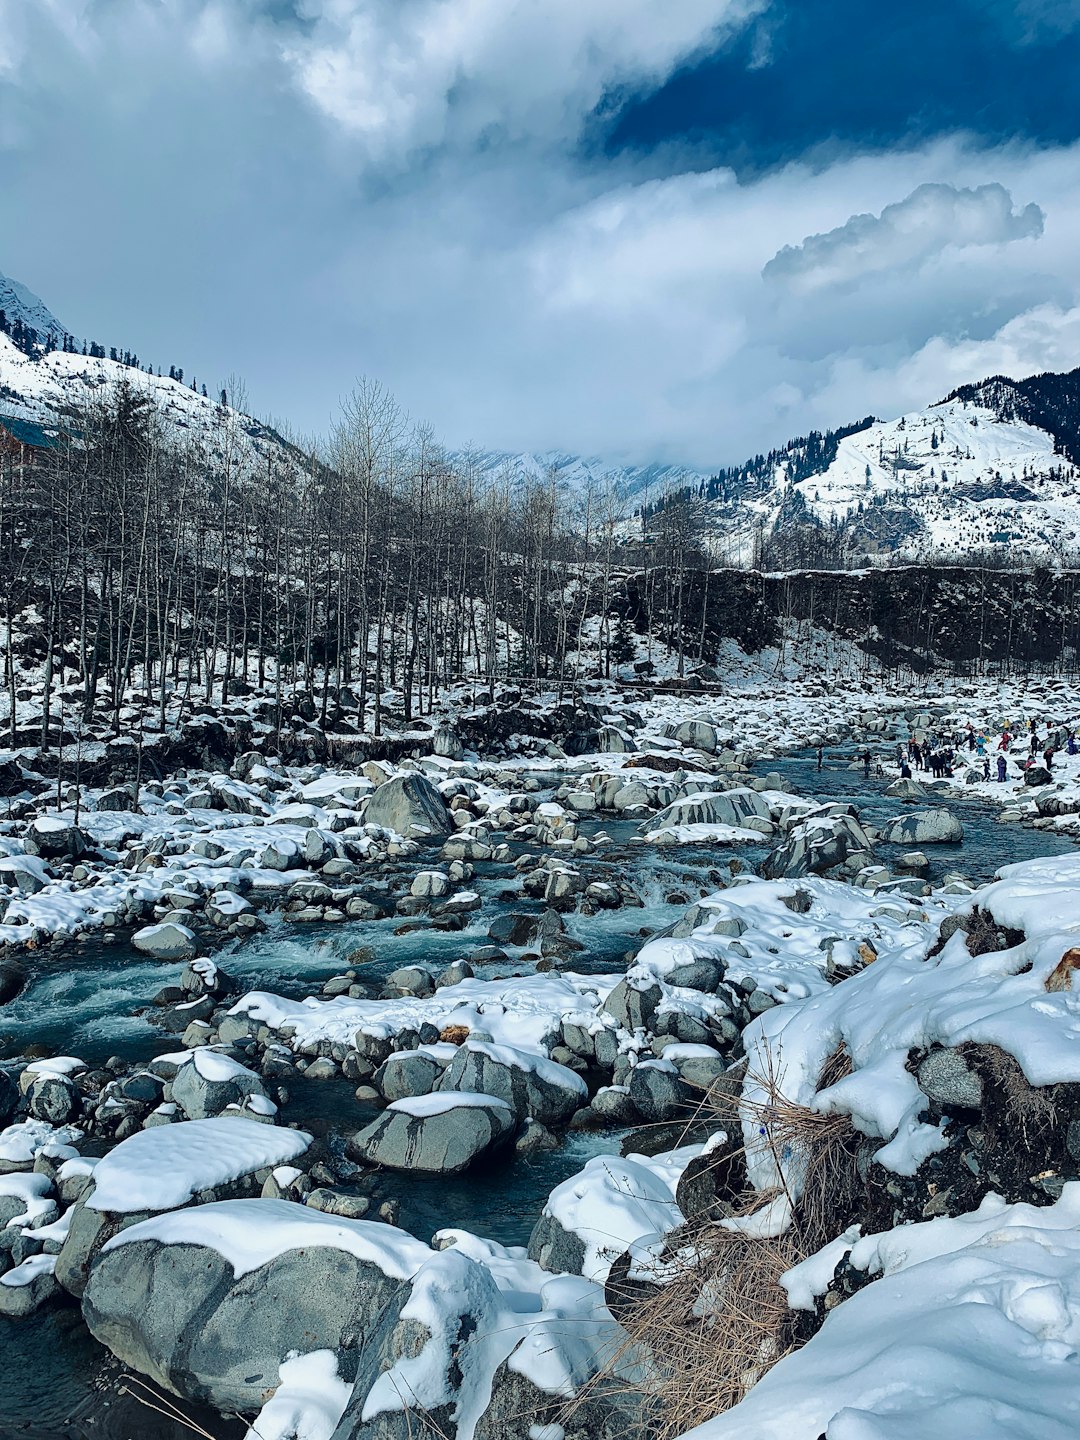 Travel Tips and Stories of Solang Valley in India